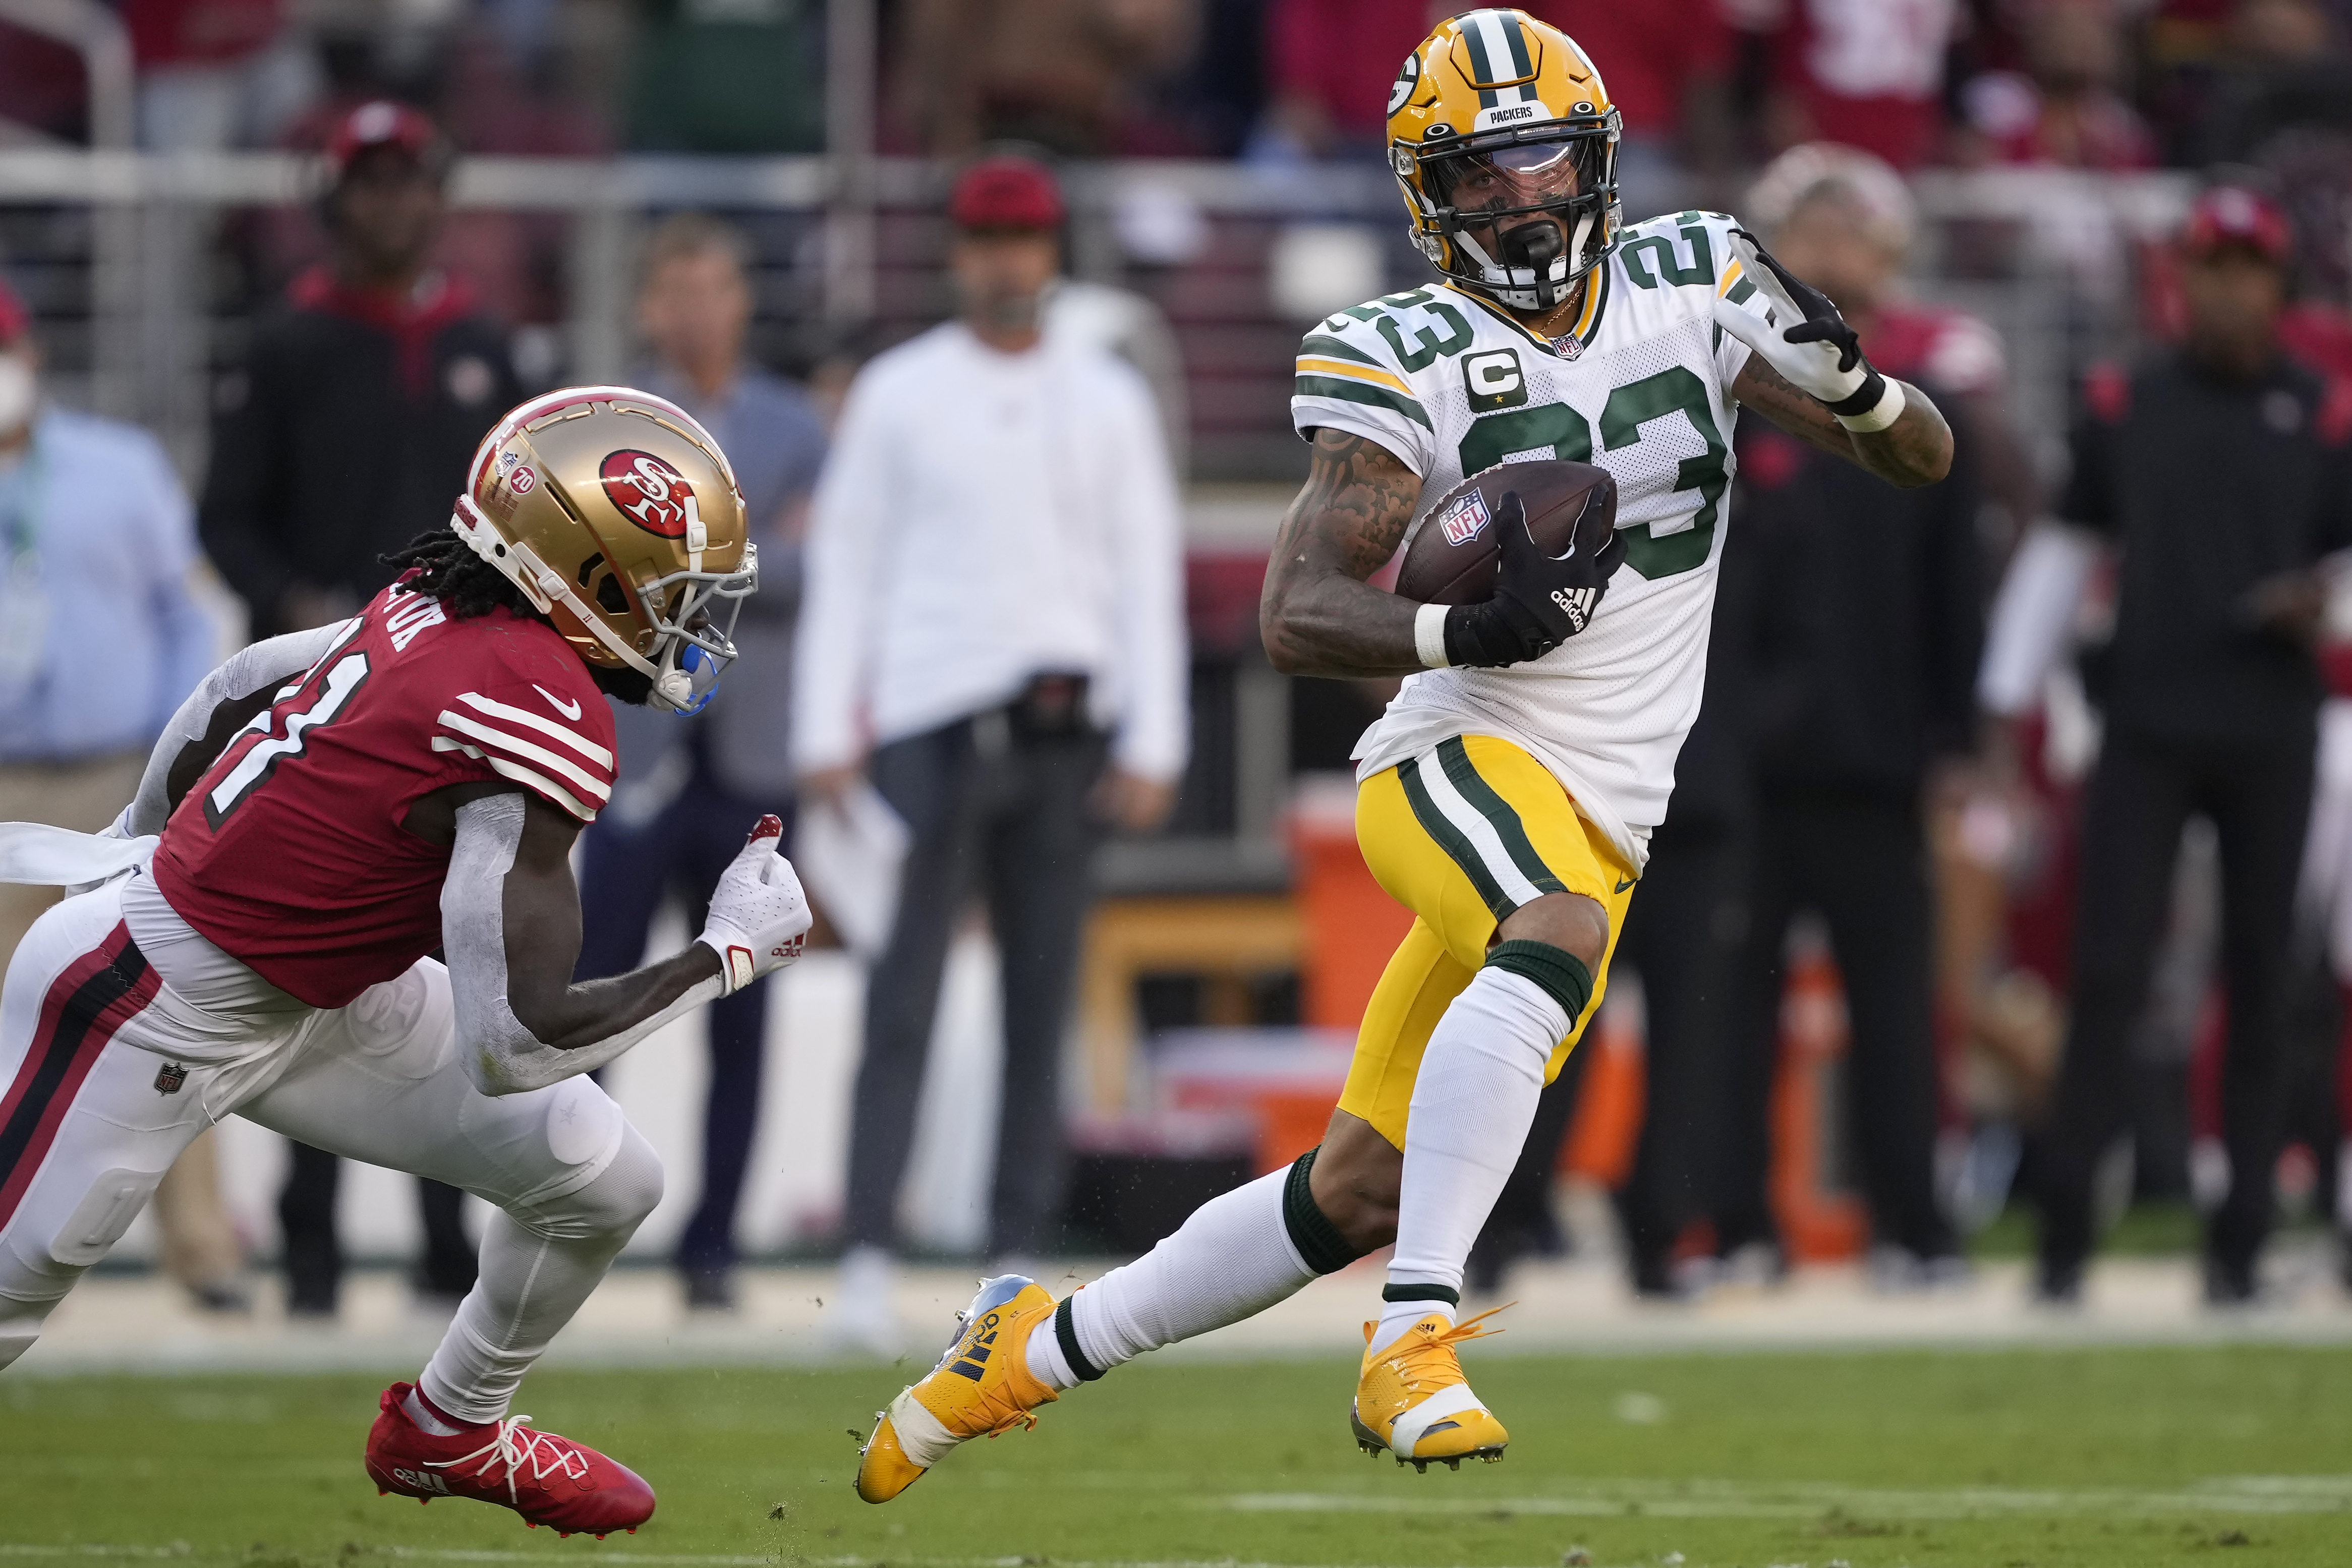 Packers vs. 49ers: NFL preseason game live streaming options, kick-off time